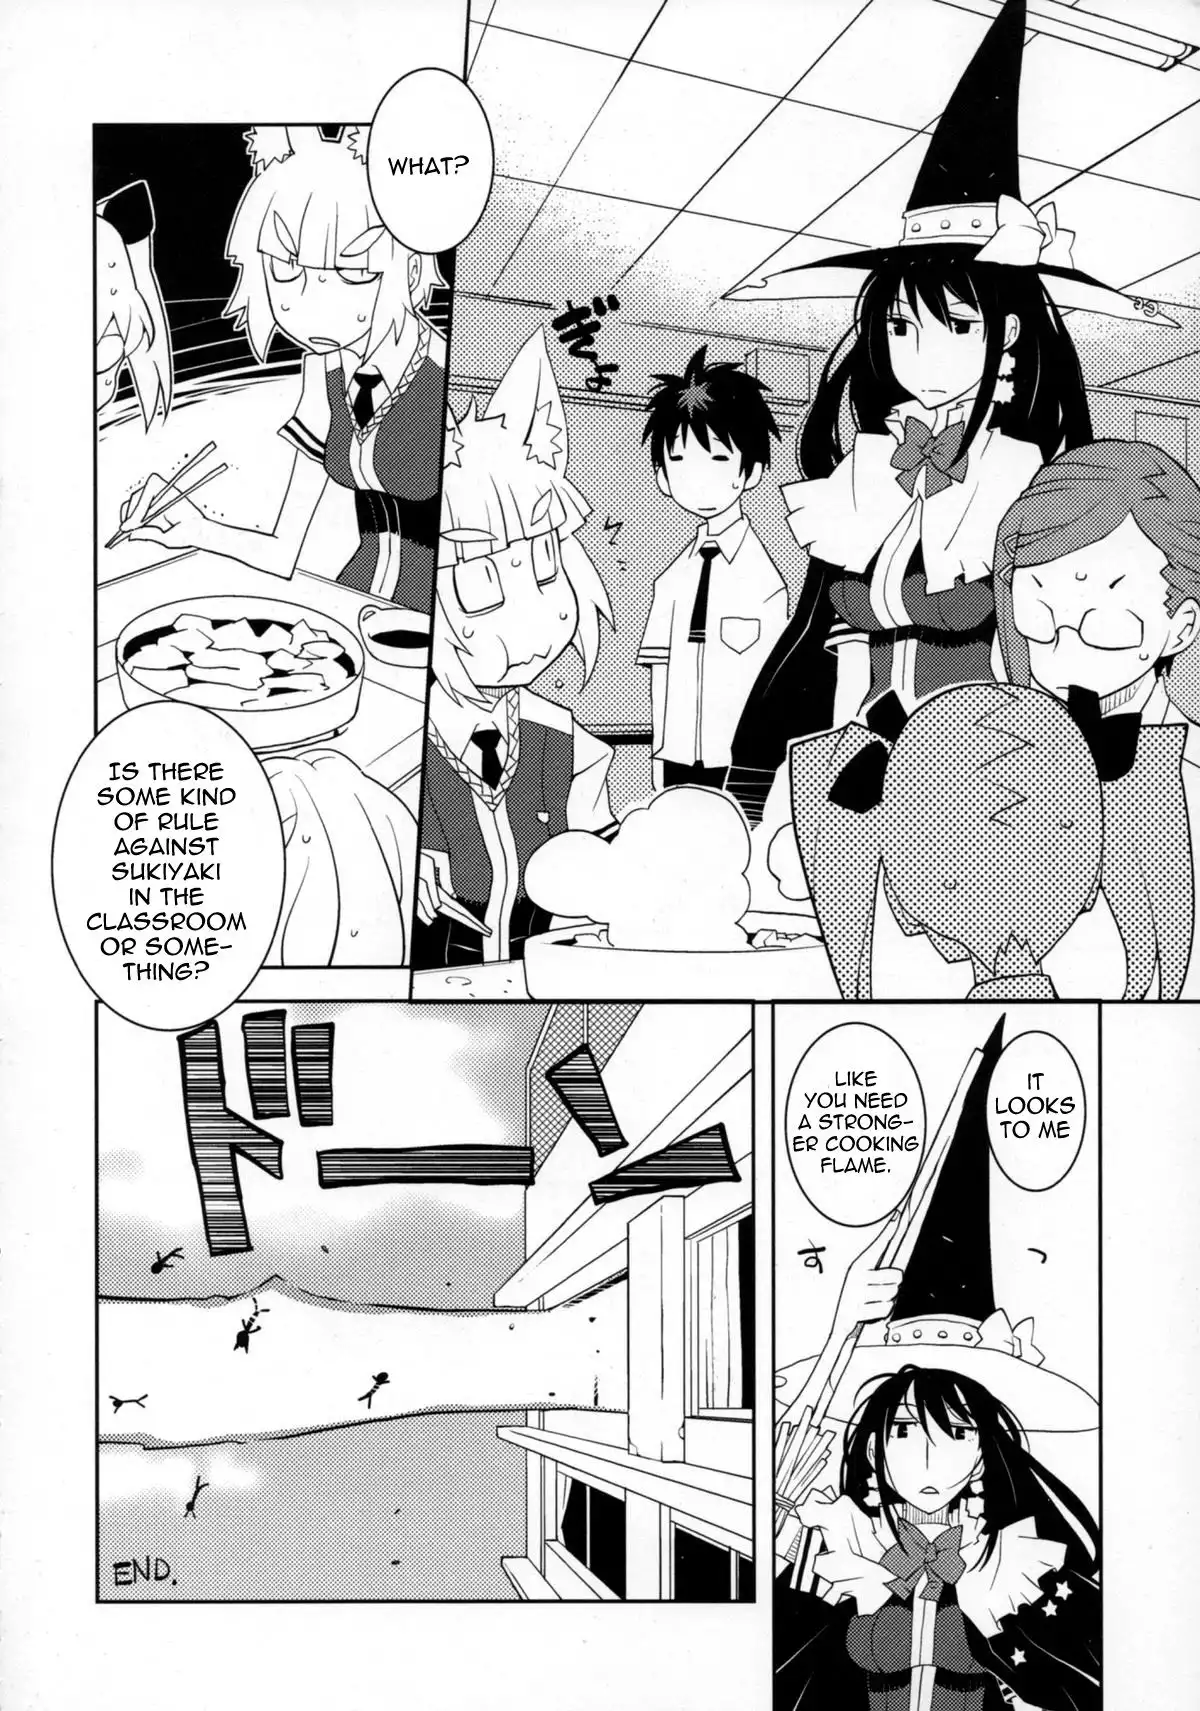 Witch Craft Works - Tower Girls Party (Doujinshi) Chapter 0